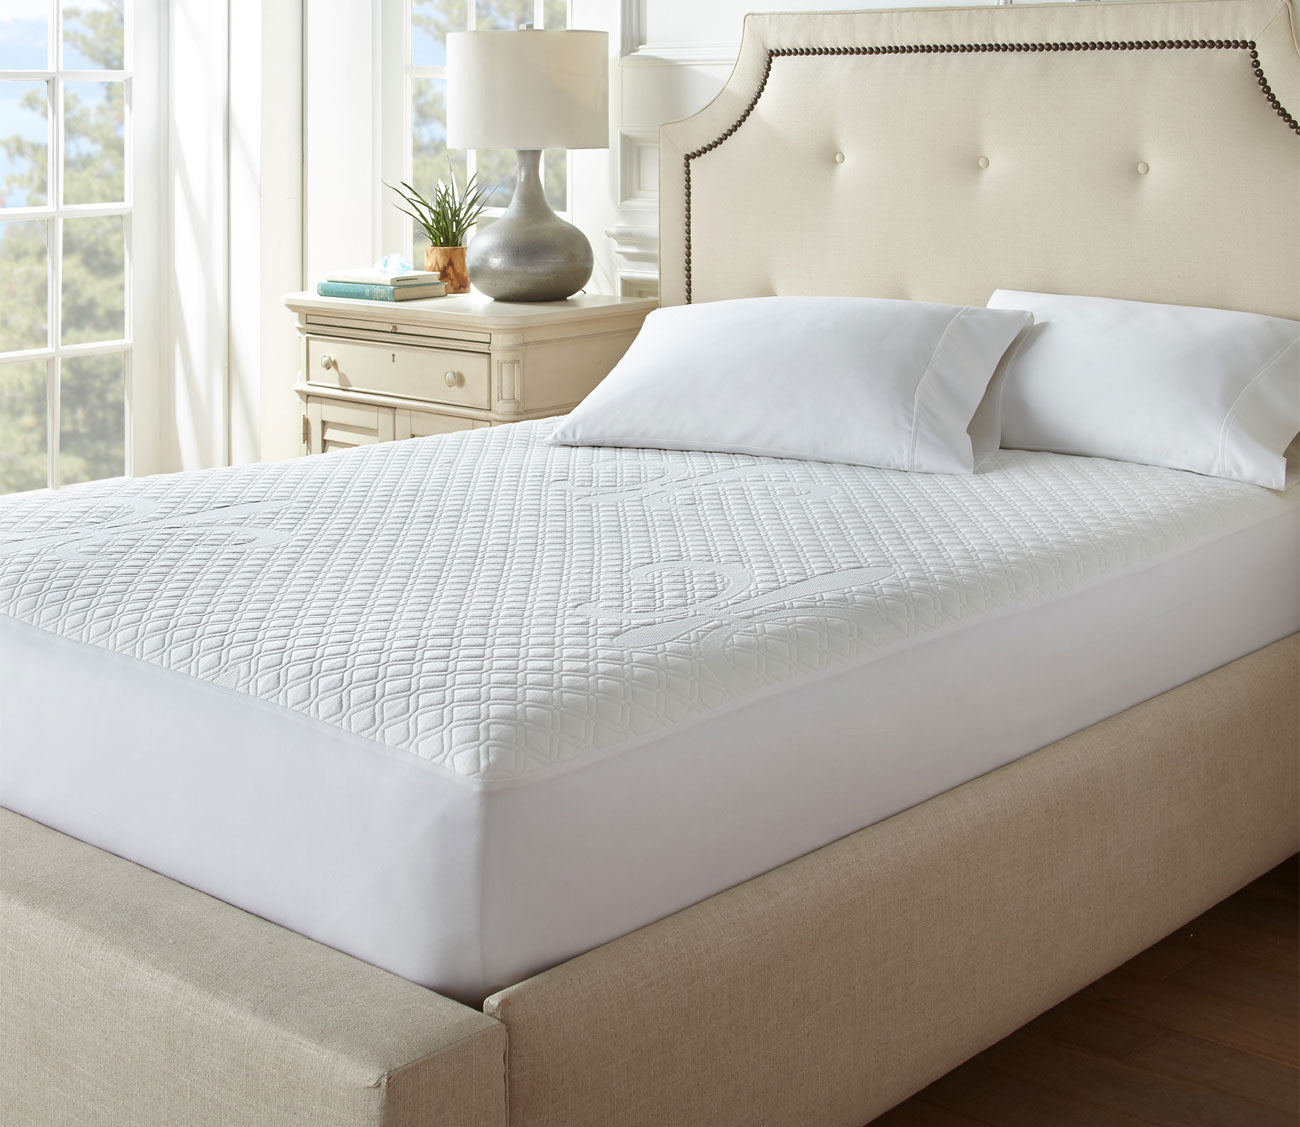 https://cdn.shopify.com/s/files/1/2420/9425/products/cooling-waterproof-mattress-protector-by-stearns-foster-789657.jpg?v=1644877141